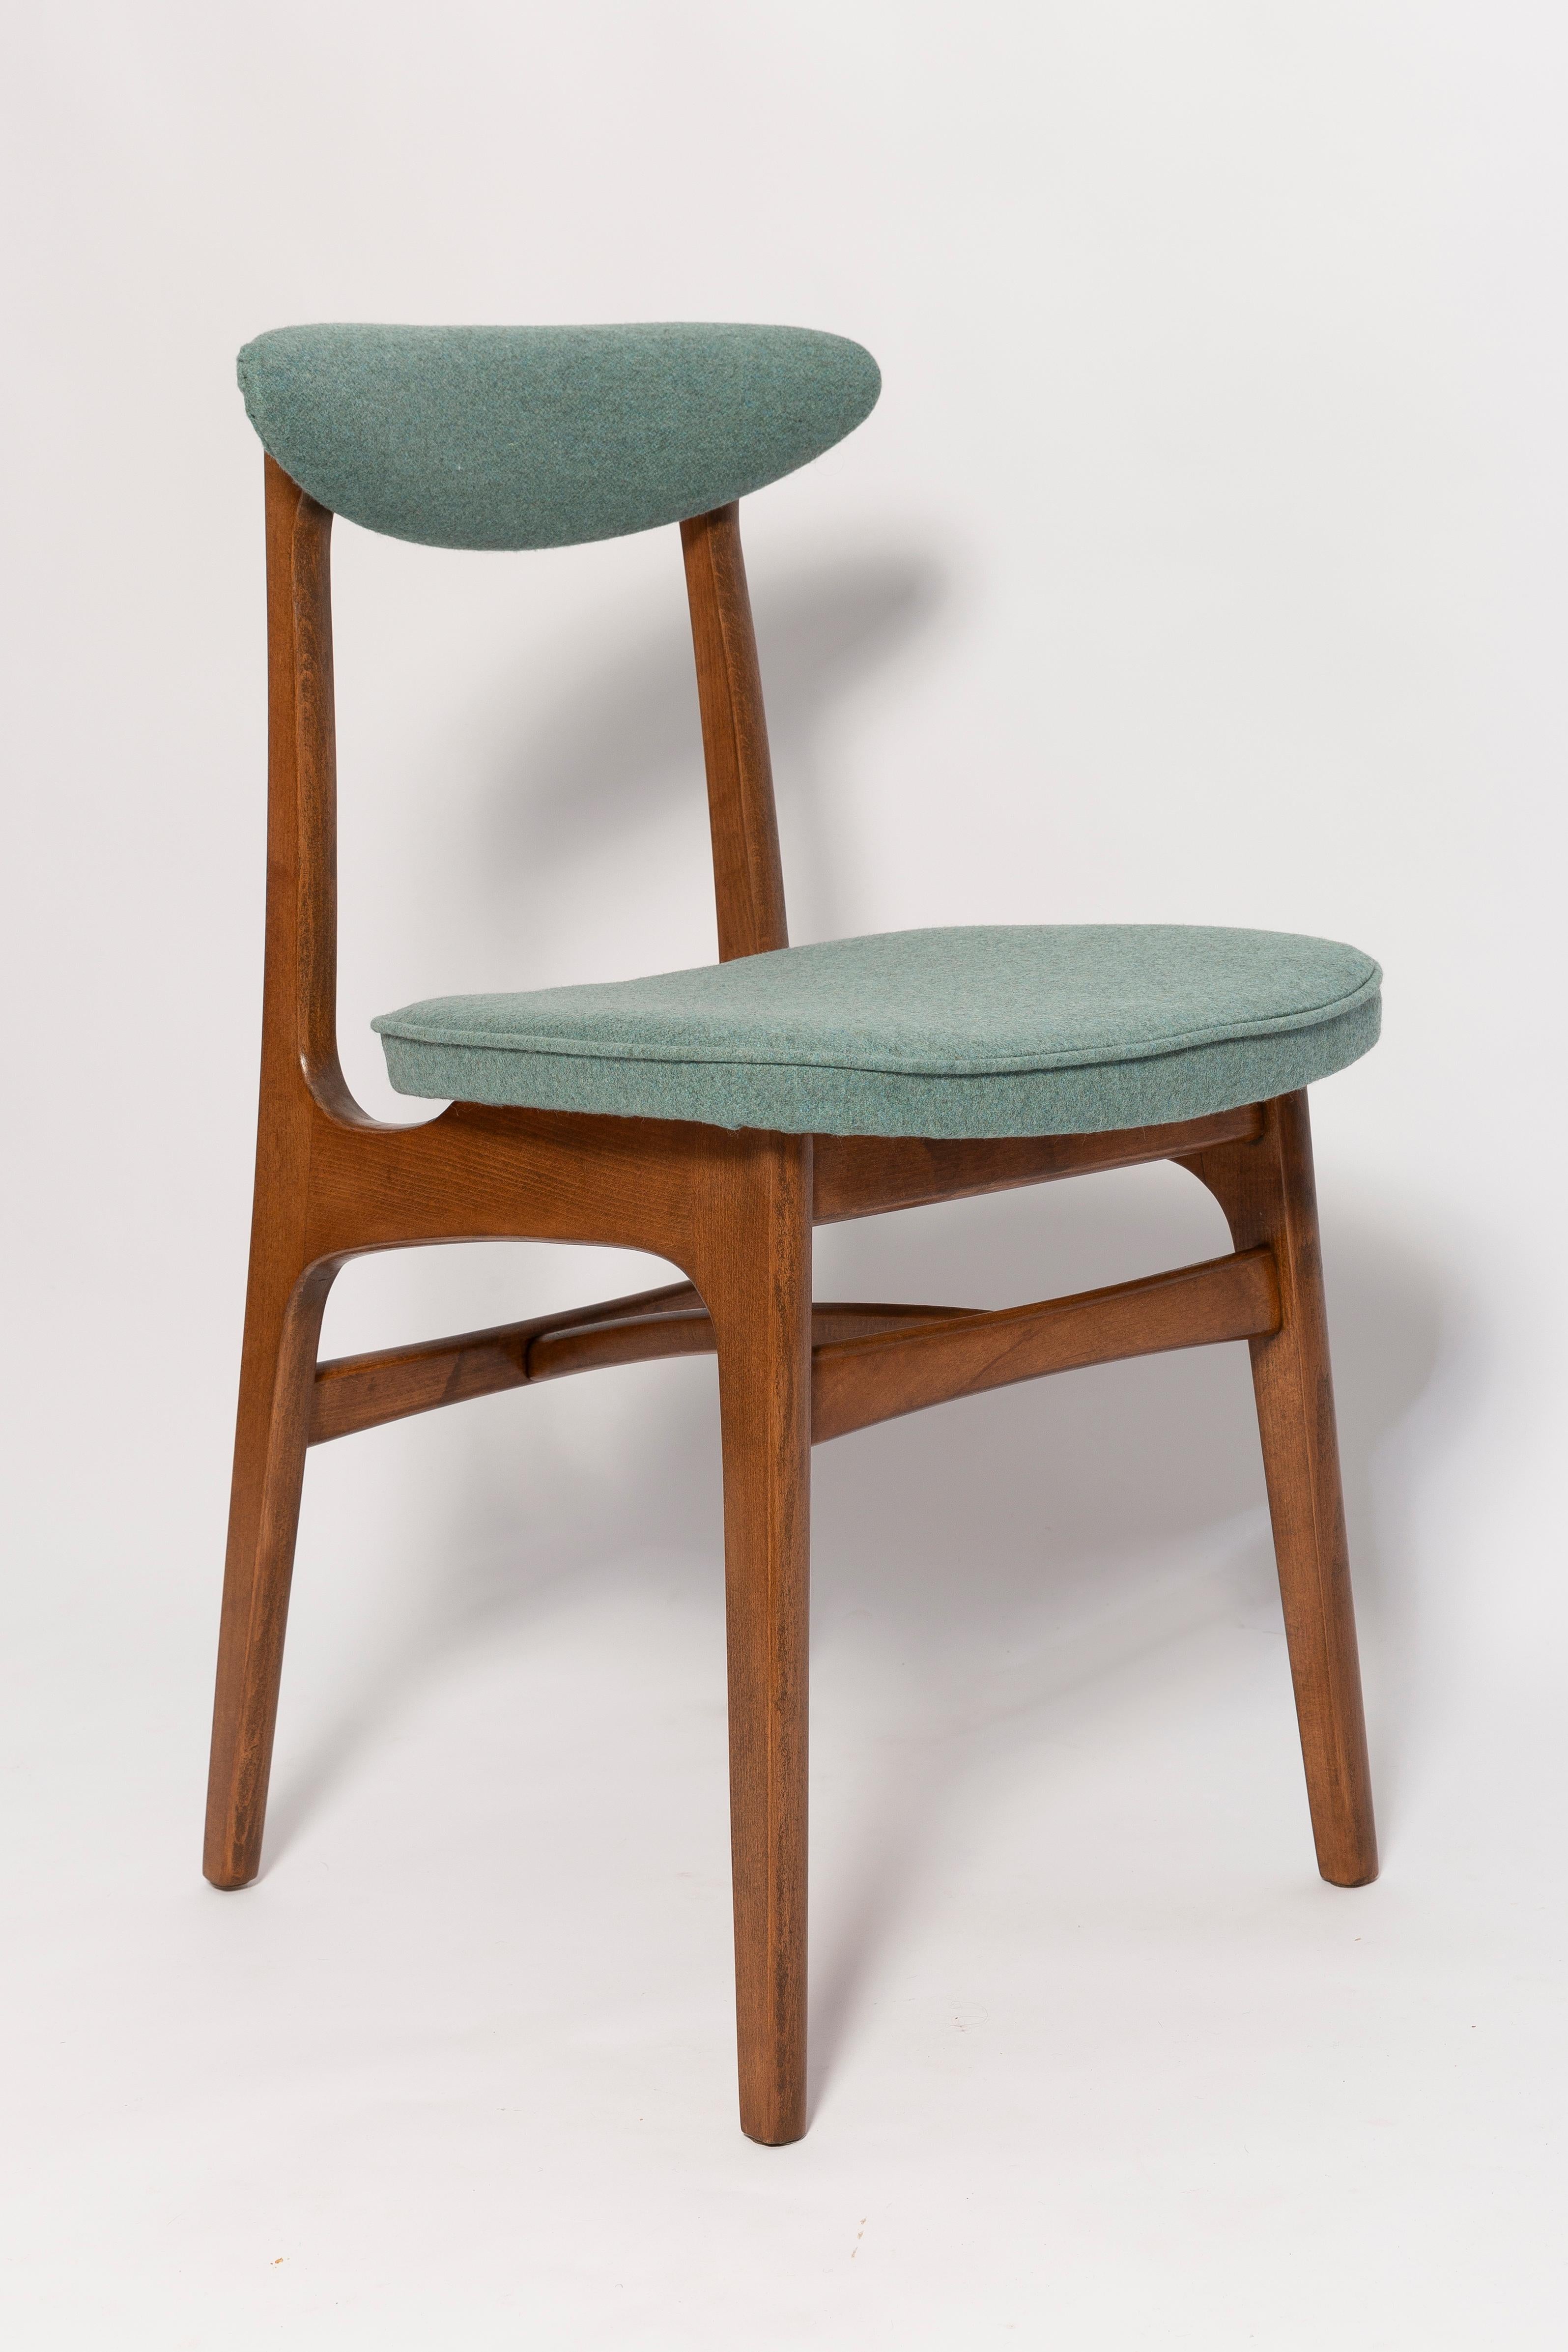 Hand-Crafted Set of Five Mid Century Wool Chairs, Rajmund Halas, Europe, 1960s For Sale